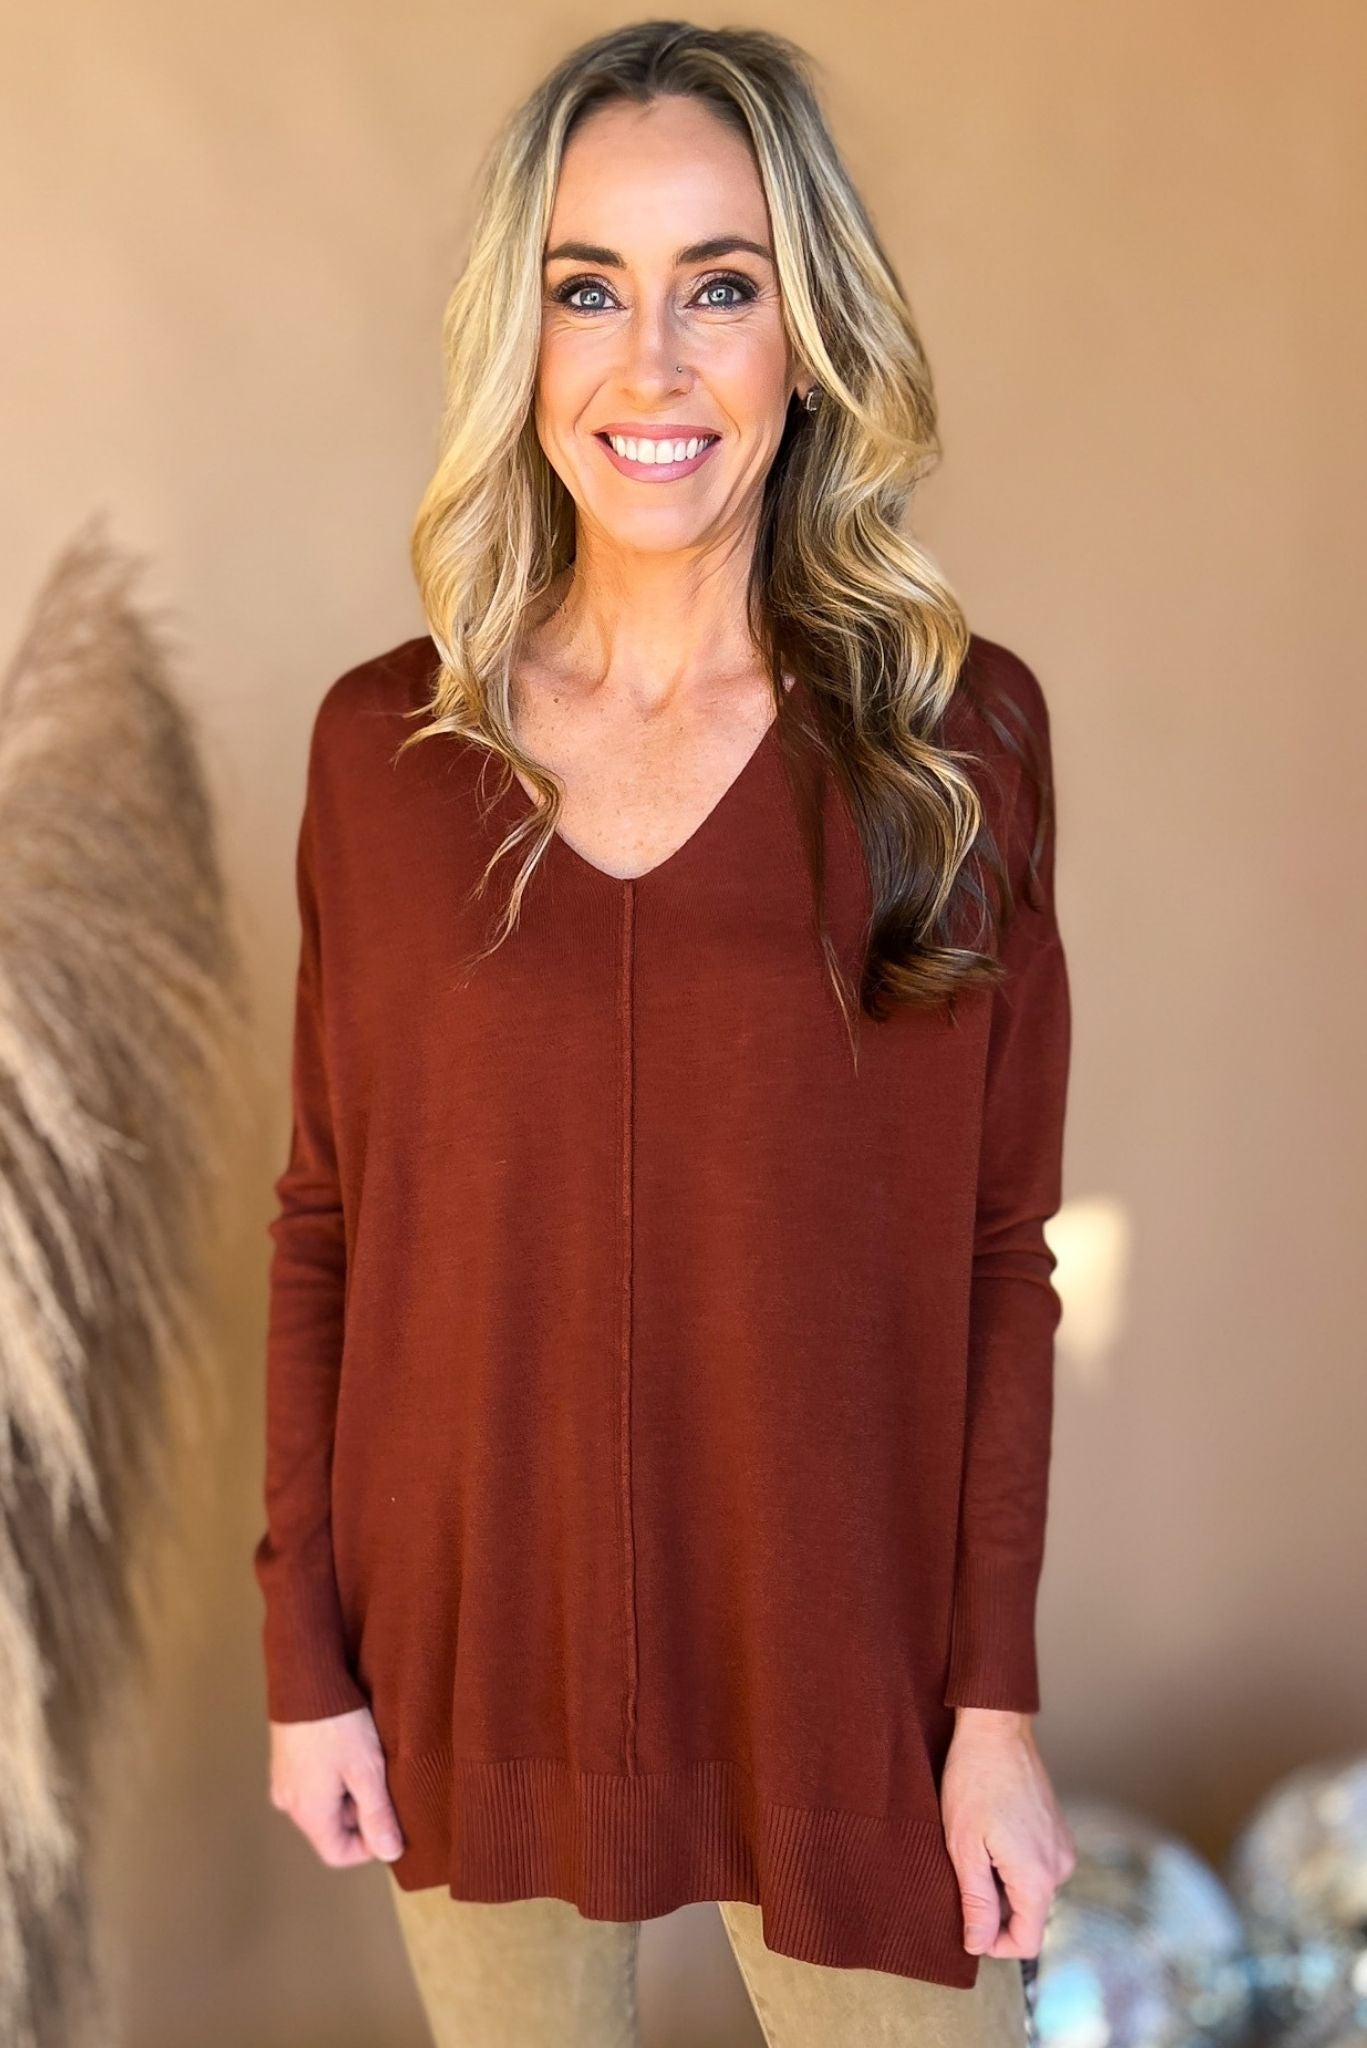 Dark Rust V Neck Front Seam Side Slit Sweater, everyday sweater, must have, front seam detail, mom style, elevated look, shop style your senses by mallory fitzsimmons